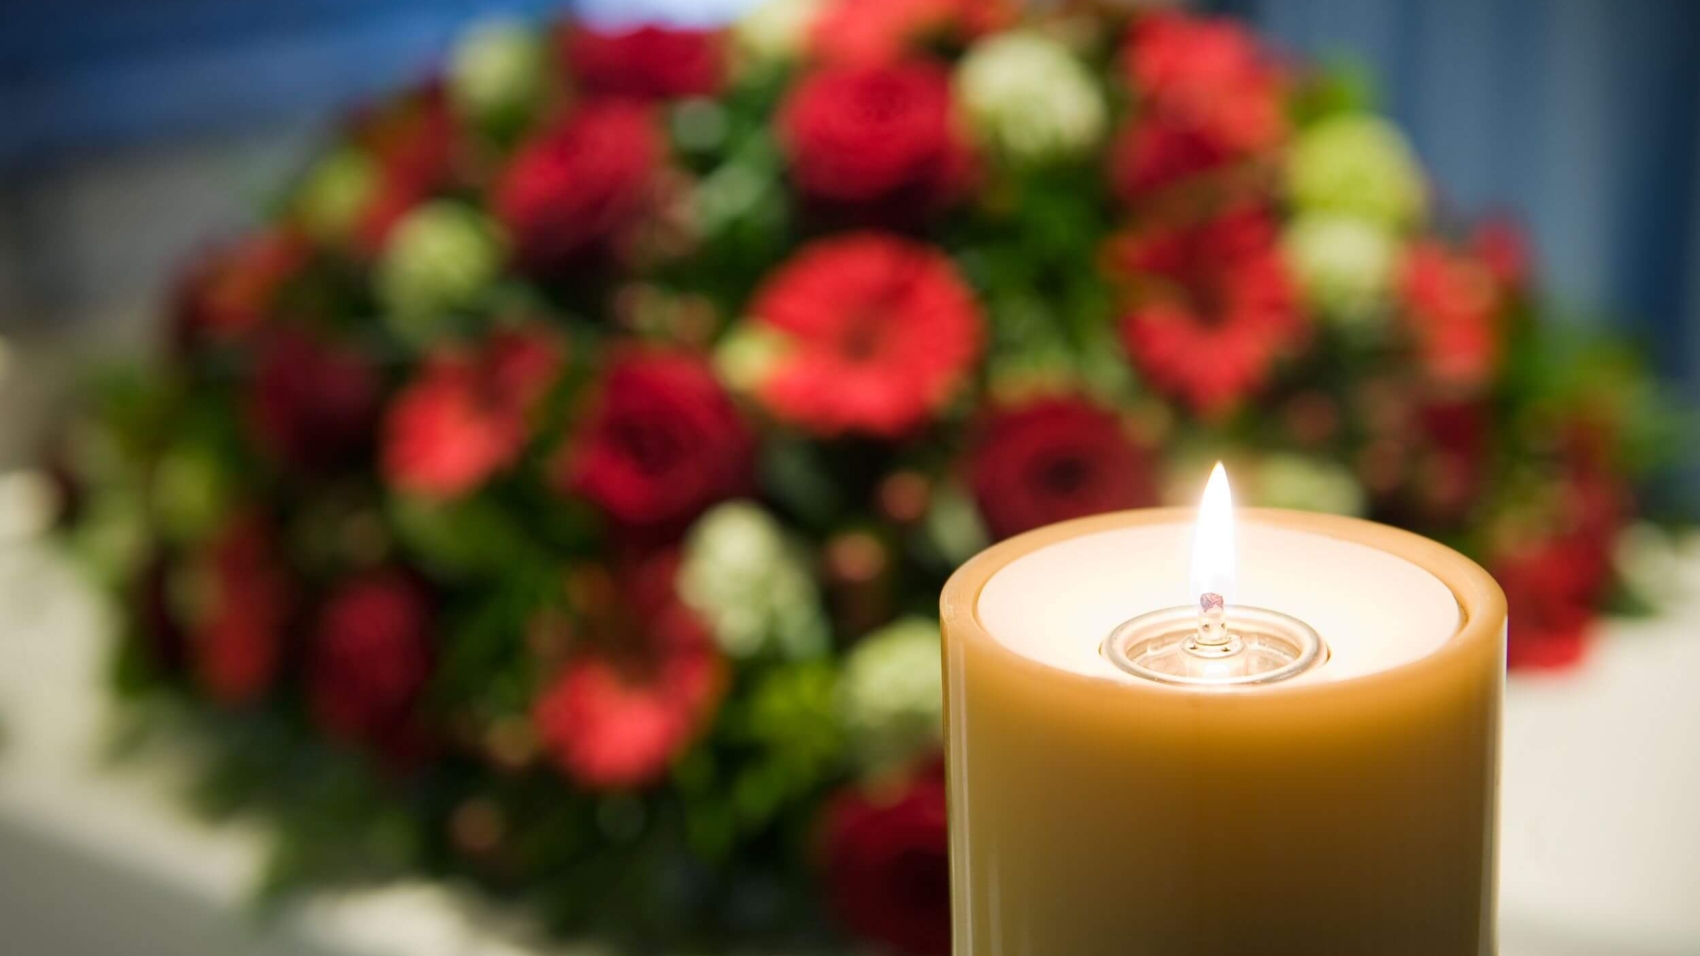 Ways That a Florida Funeral Home Can Act Negligently